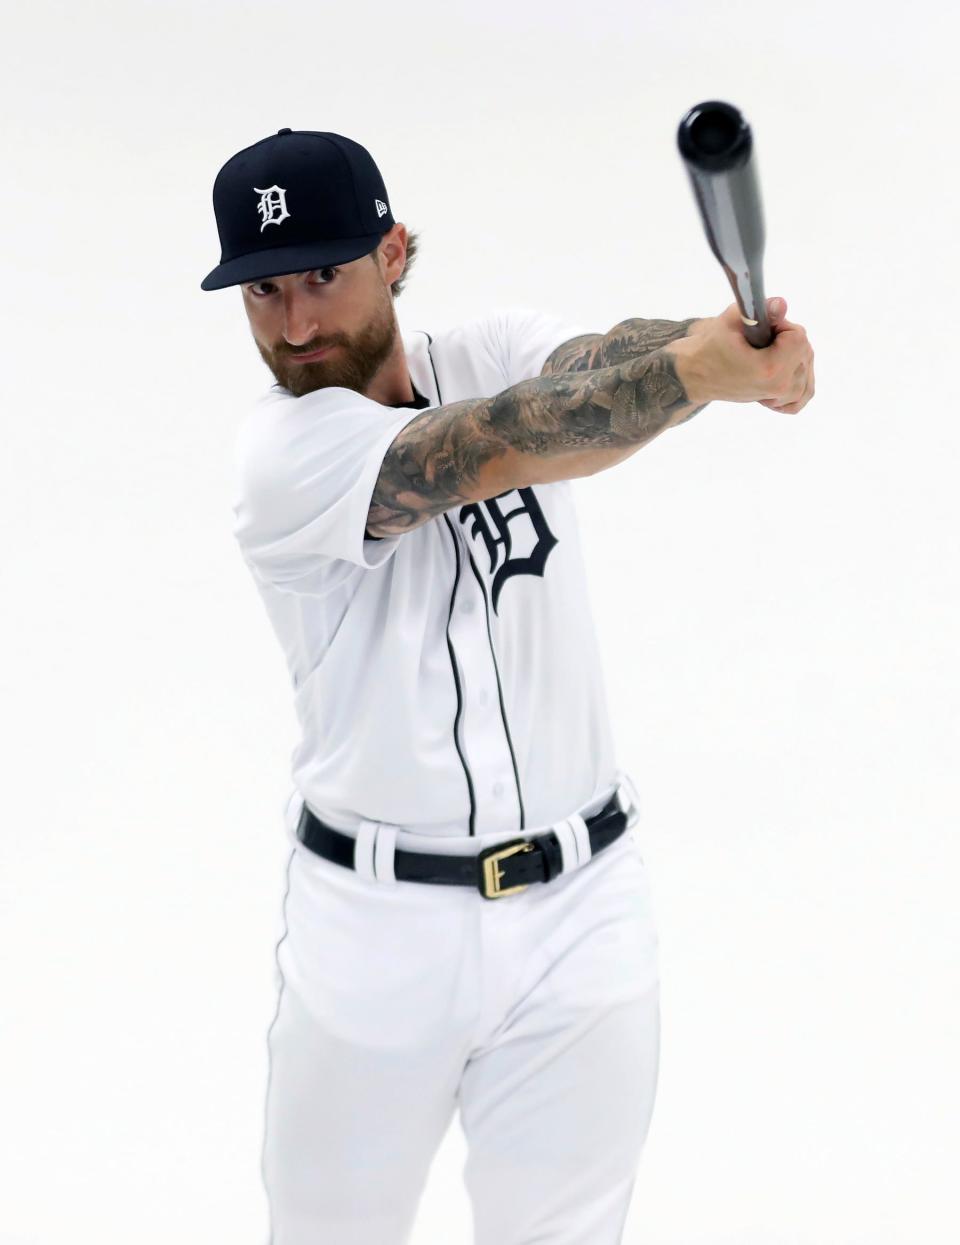 Detroit Tigers catcher Eric Haase poses during picture day at spring training in Lakeland, Florida on Sunday, Feb. 19, 2023. Haase loves the outdoors and bears one of the tattoos on his arm represent a momma and father bear with the cubs walking behind them. "That's my wife and kids you don't mess with mom and cubs."